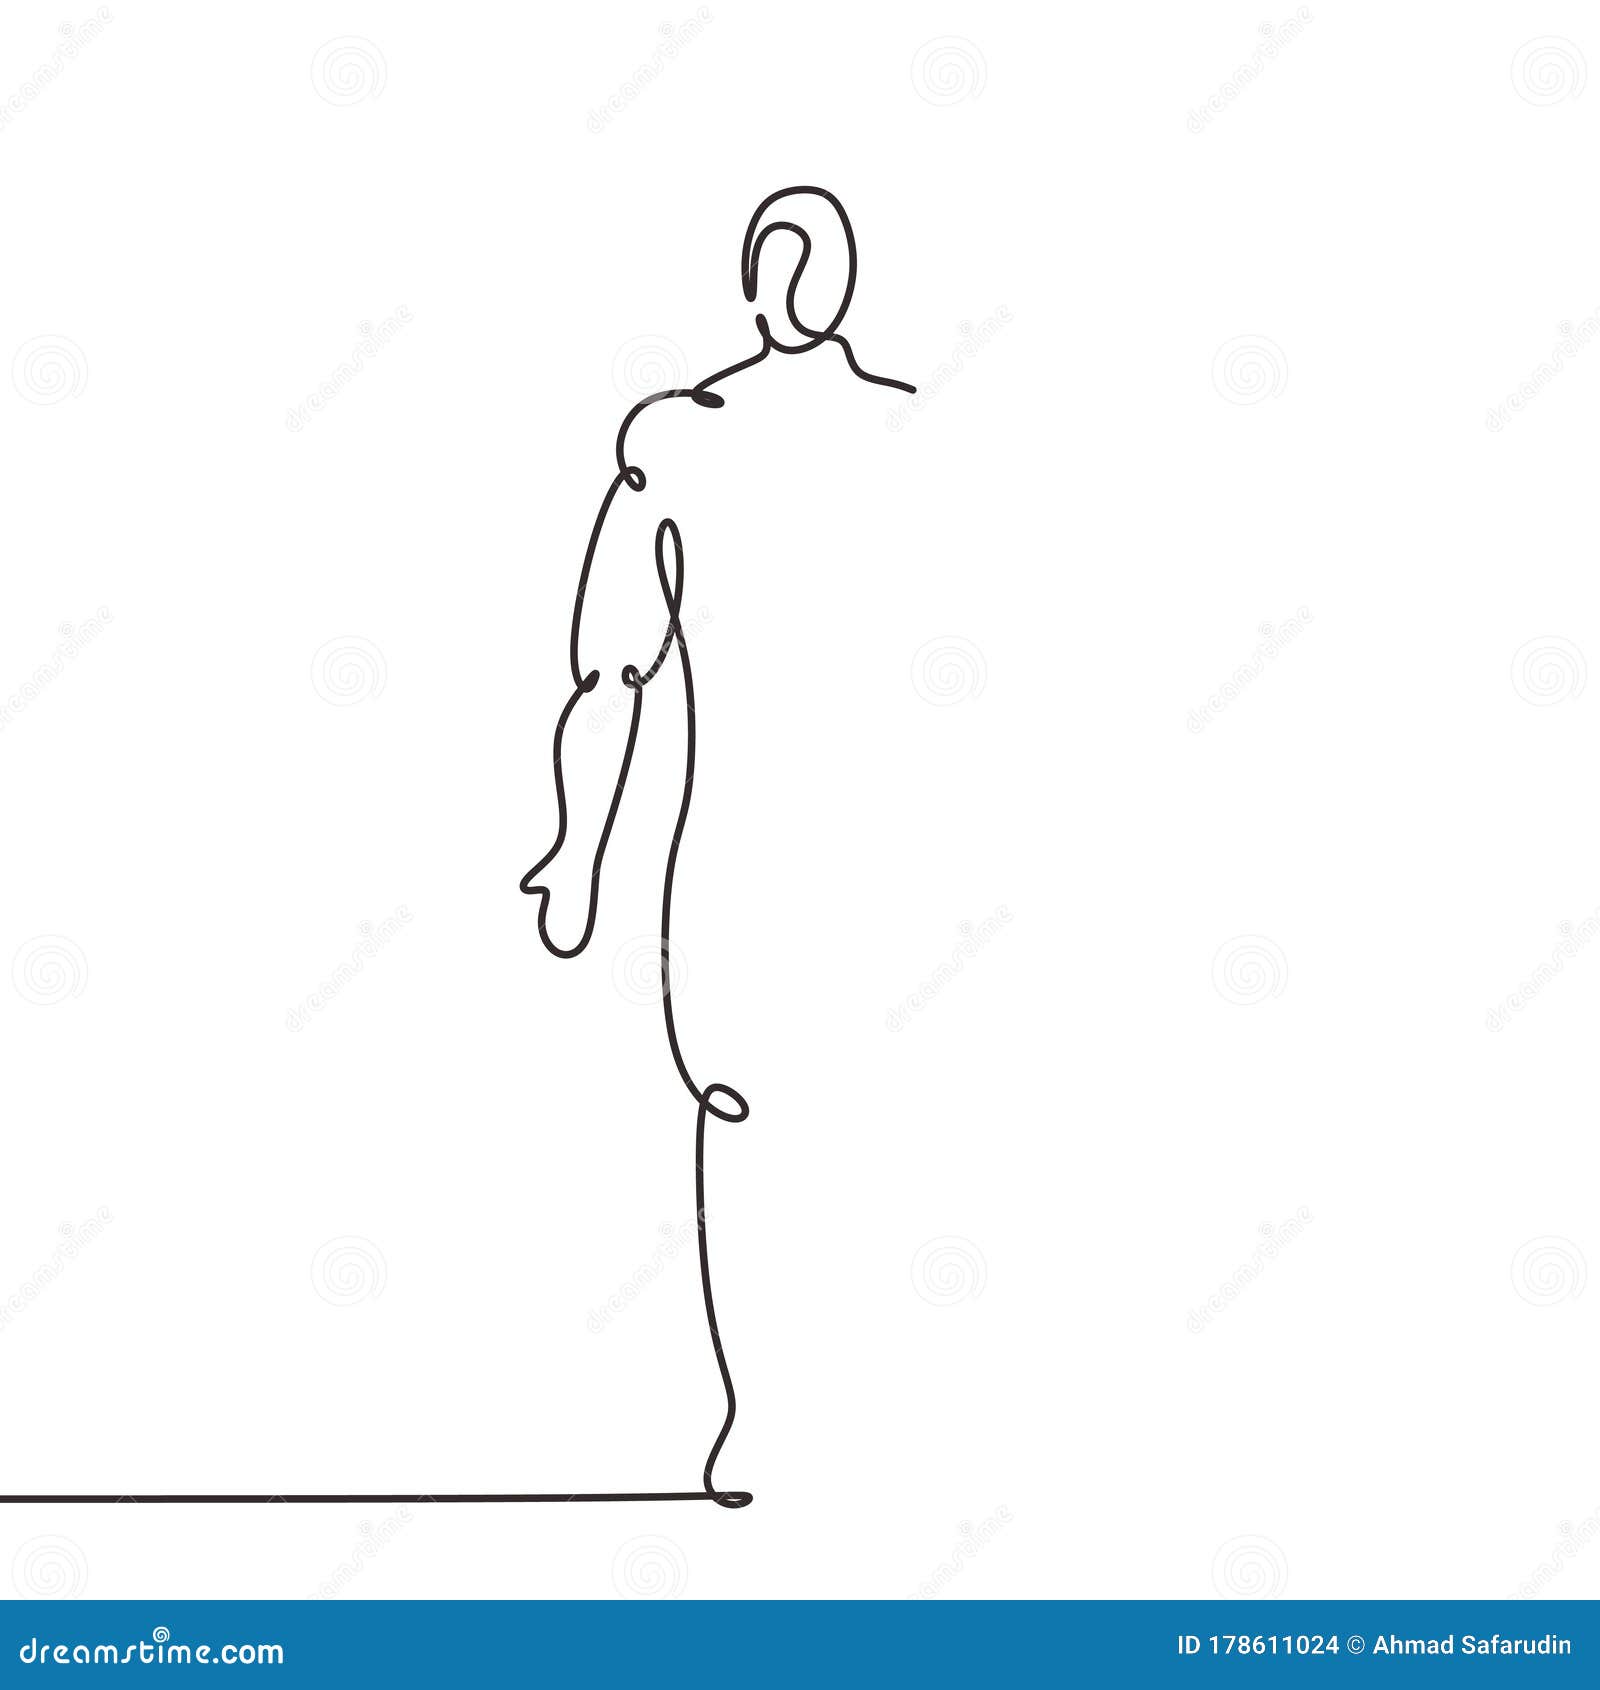 Line Drawing Human Body Stock Illustrations 11 977 Line Drawing Human Body Stock Illustrations Vectors Clipart Dreamstime